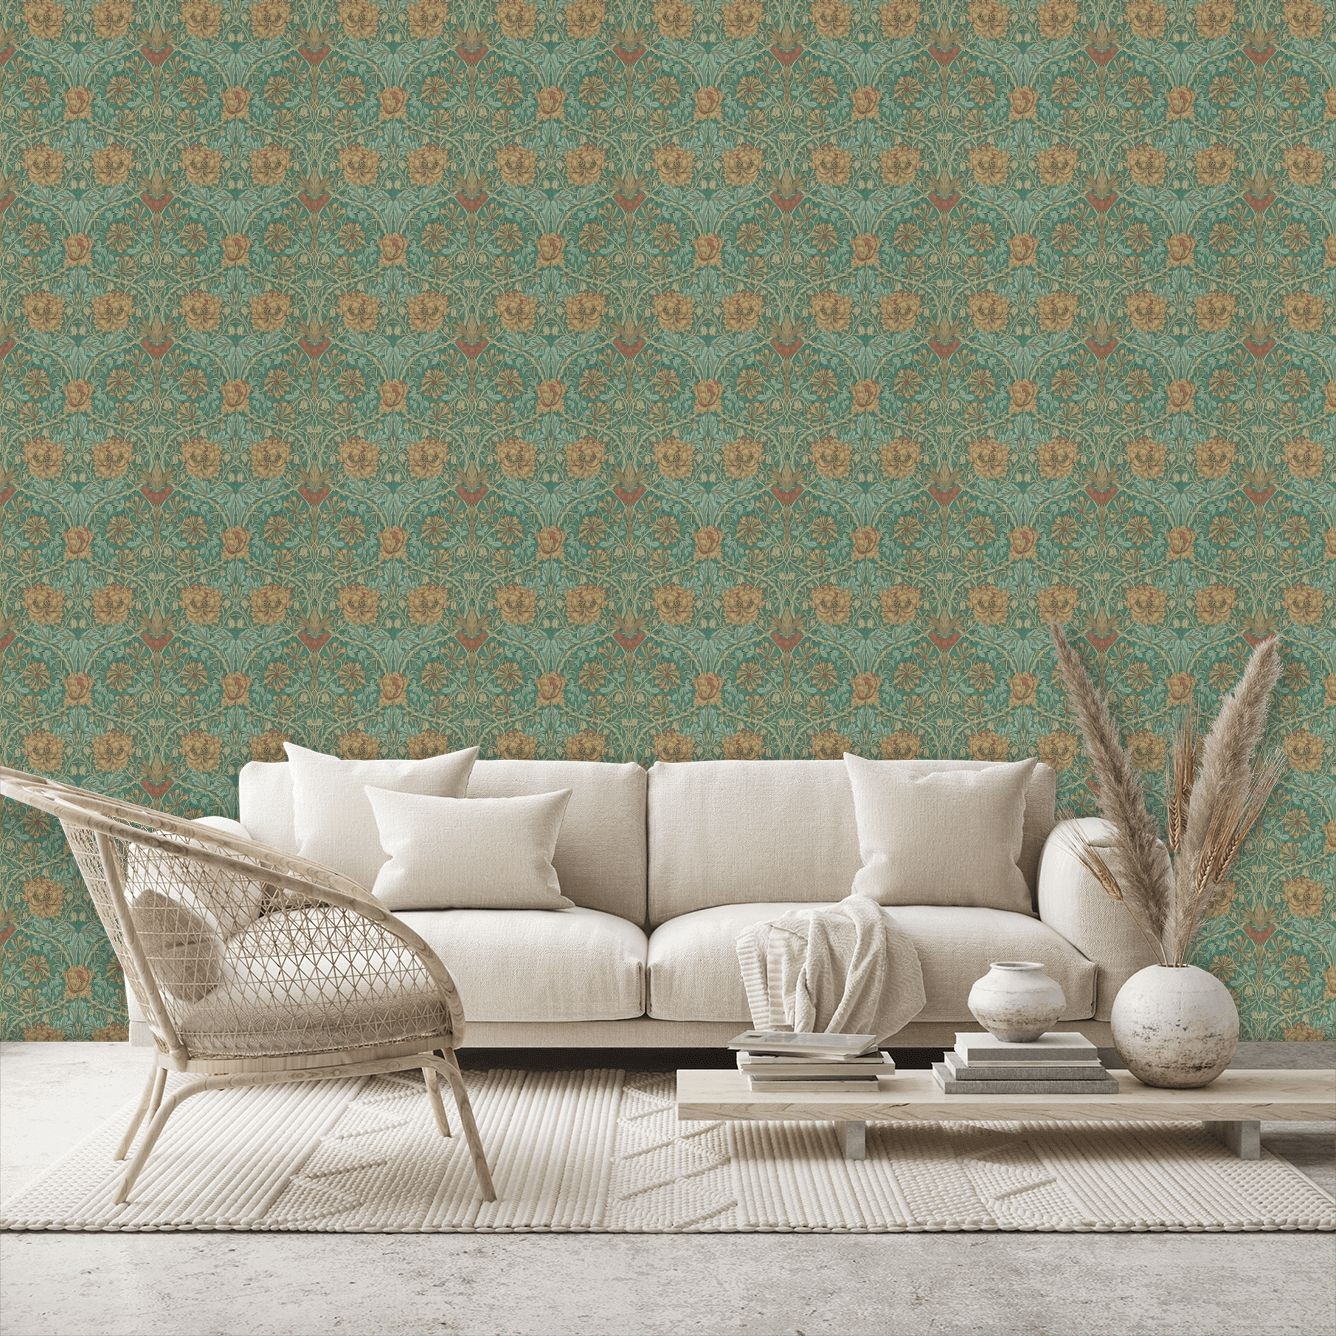 Honeysuckle and Tulip Wallpaper - Emerald/Russet - By Morris and Co